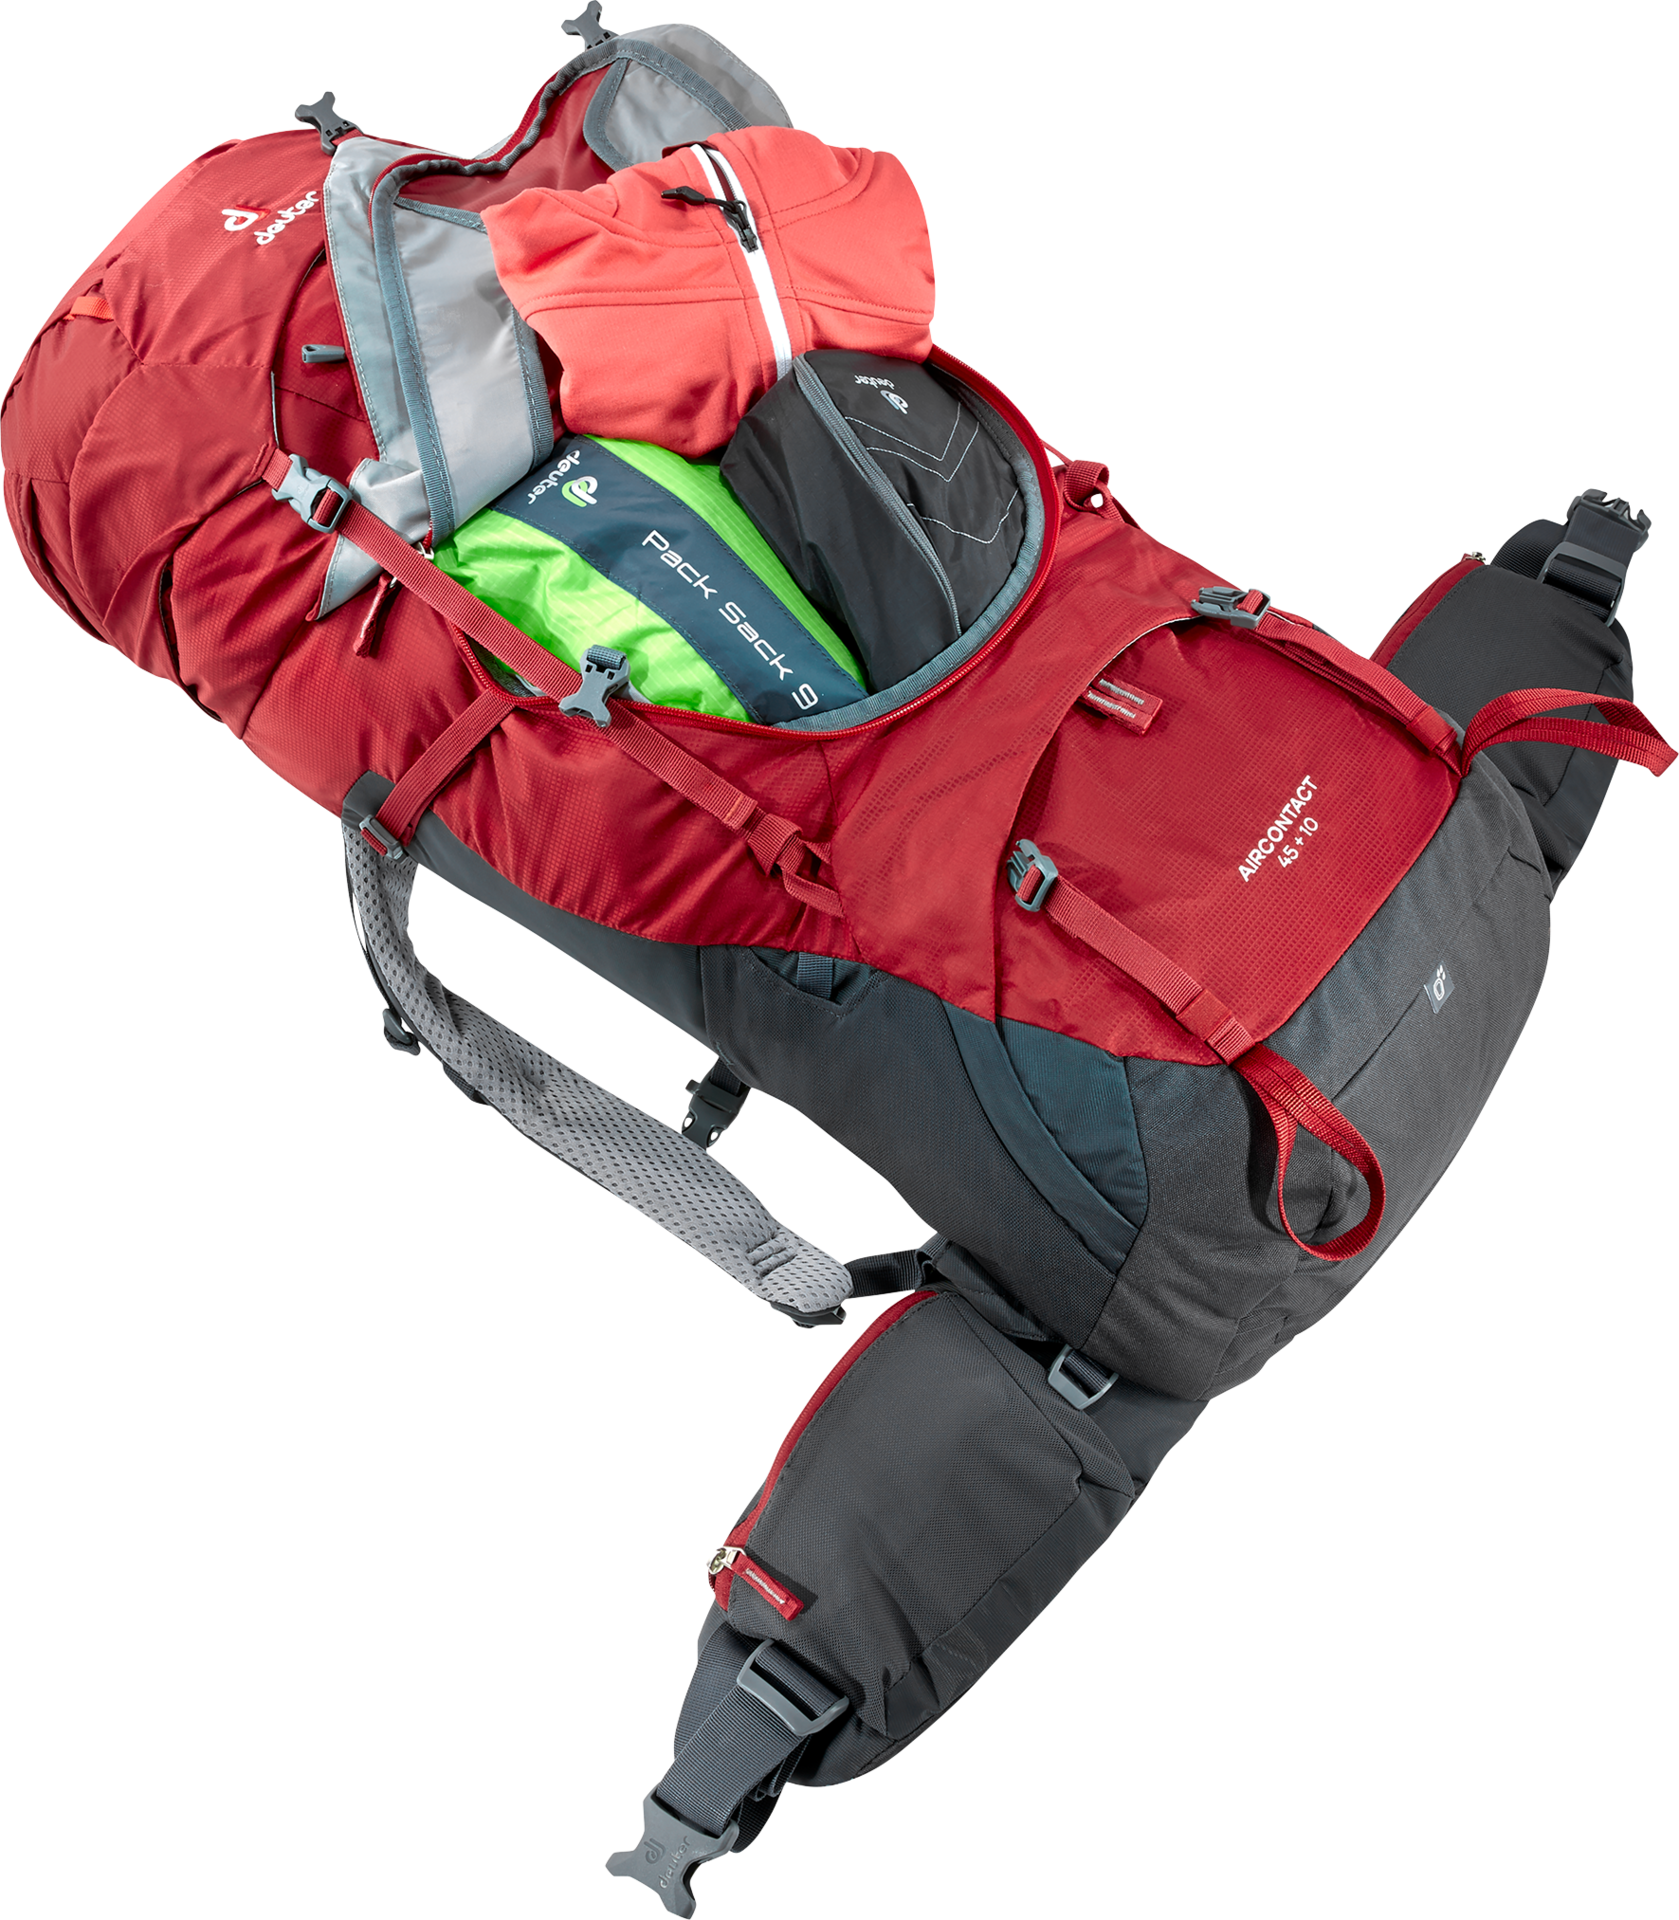 Deuter Aircontact 45+10 Cranberry Graphite Backpack